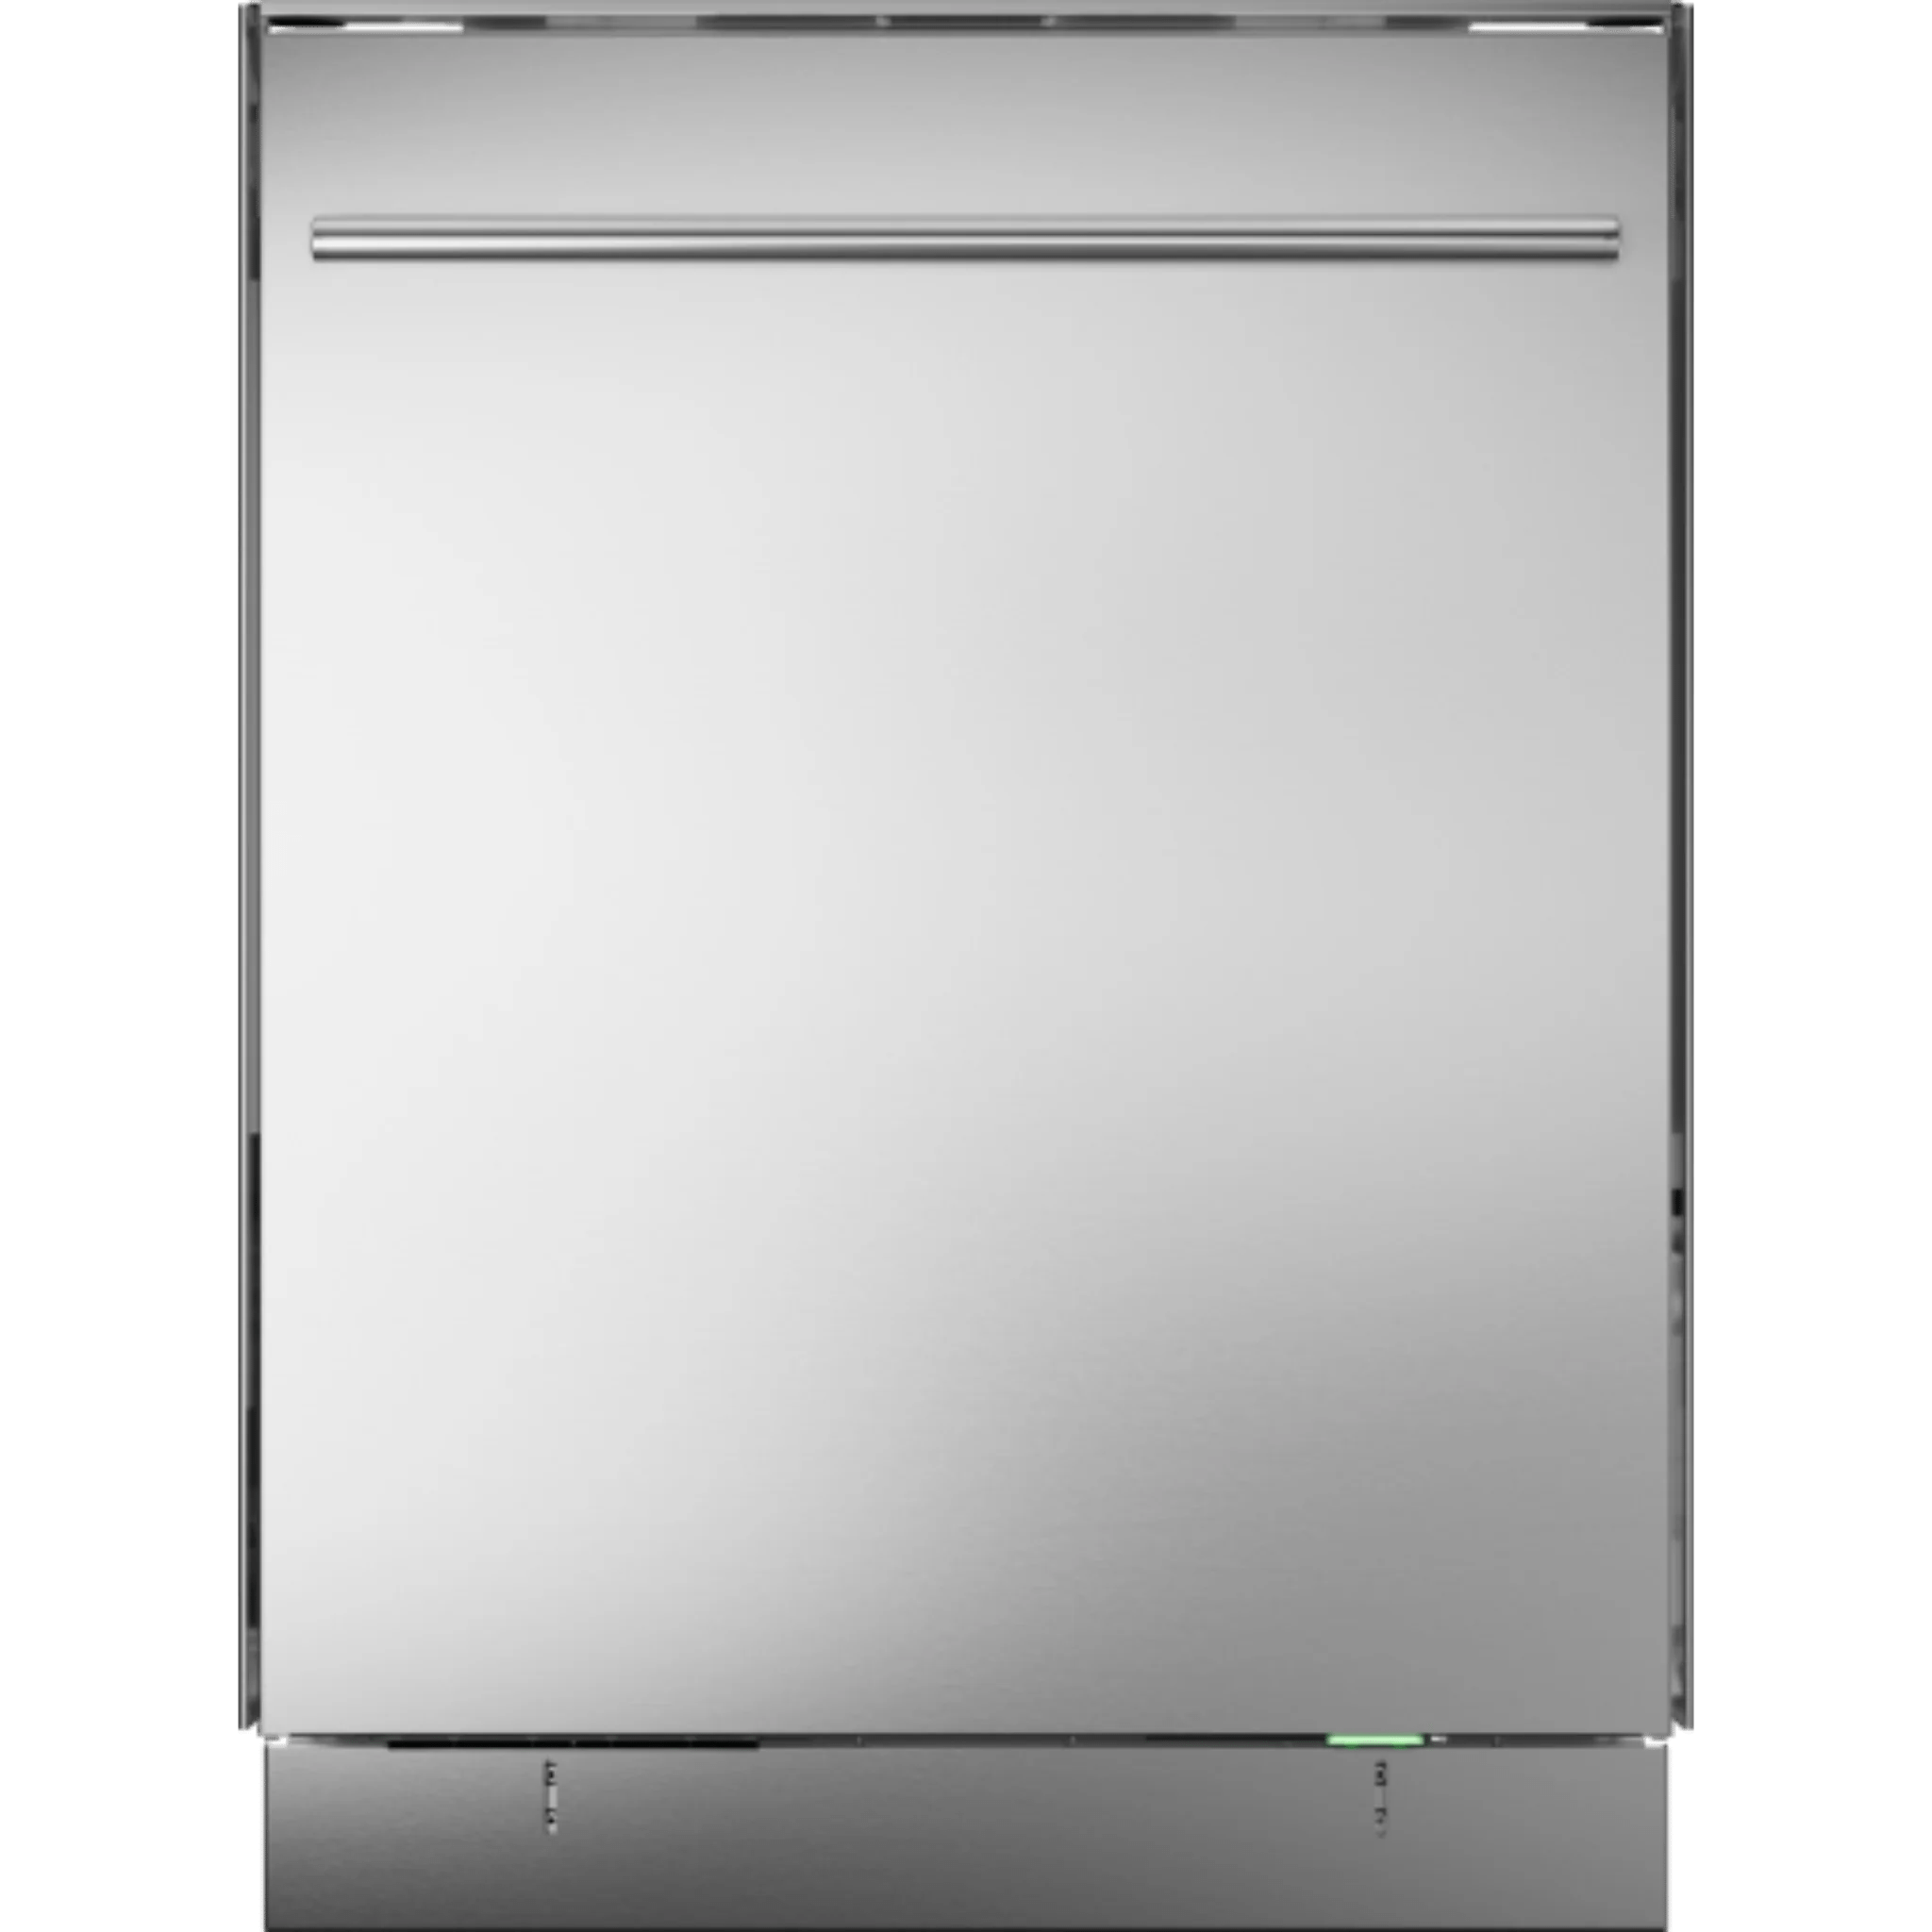 Asko Logic 24 Inch Wide 16 Place Setting Built-In Top Control Dishwasher with T-Bar Handle, Turbo Combi Drying™, and Auto Door Open Drying™ Dishwashers DBI564TS Luxury Appliances Direct